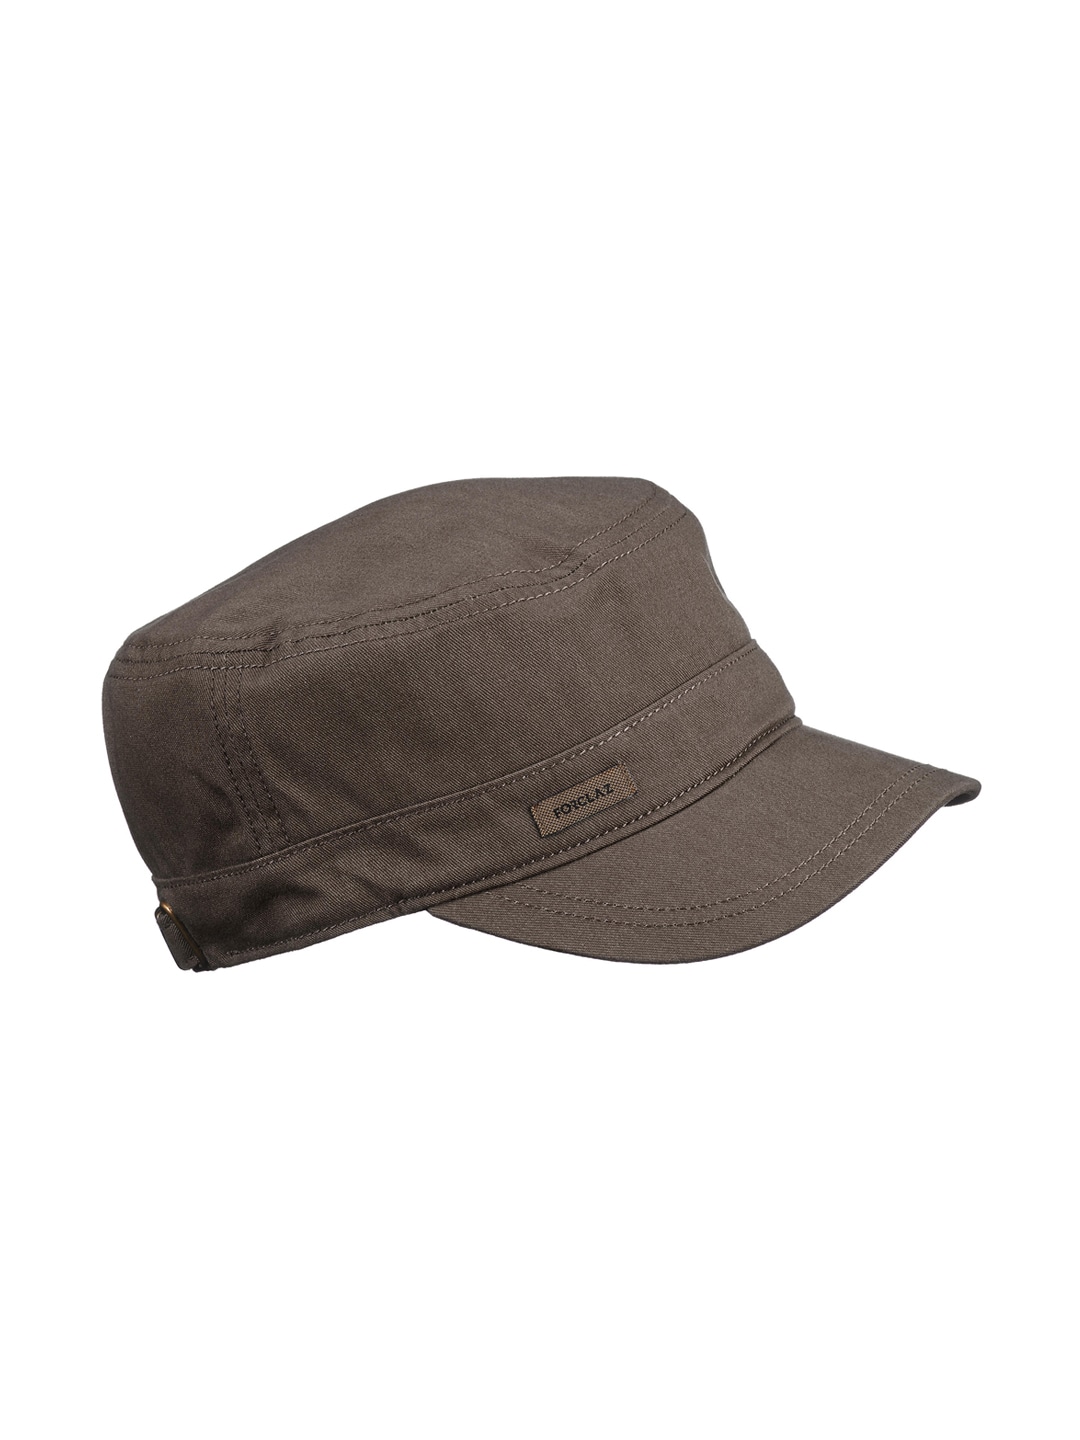 FORCLAZ By Decathlon Unisex Olive Green Solid Trekking Cap Travel 500 Price in India